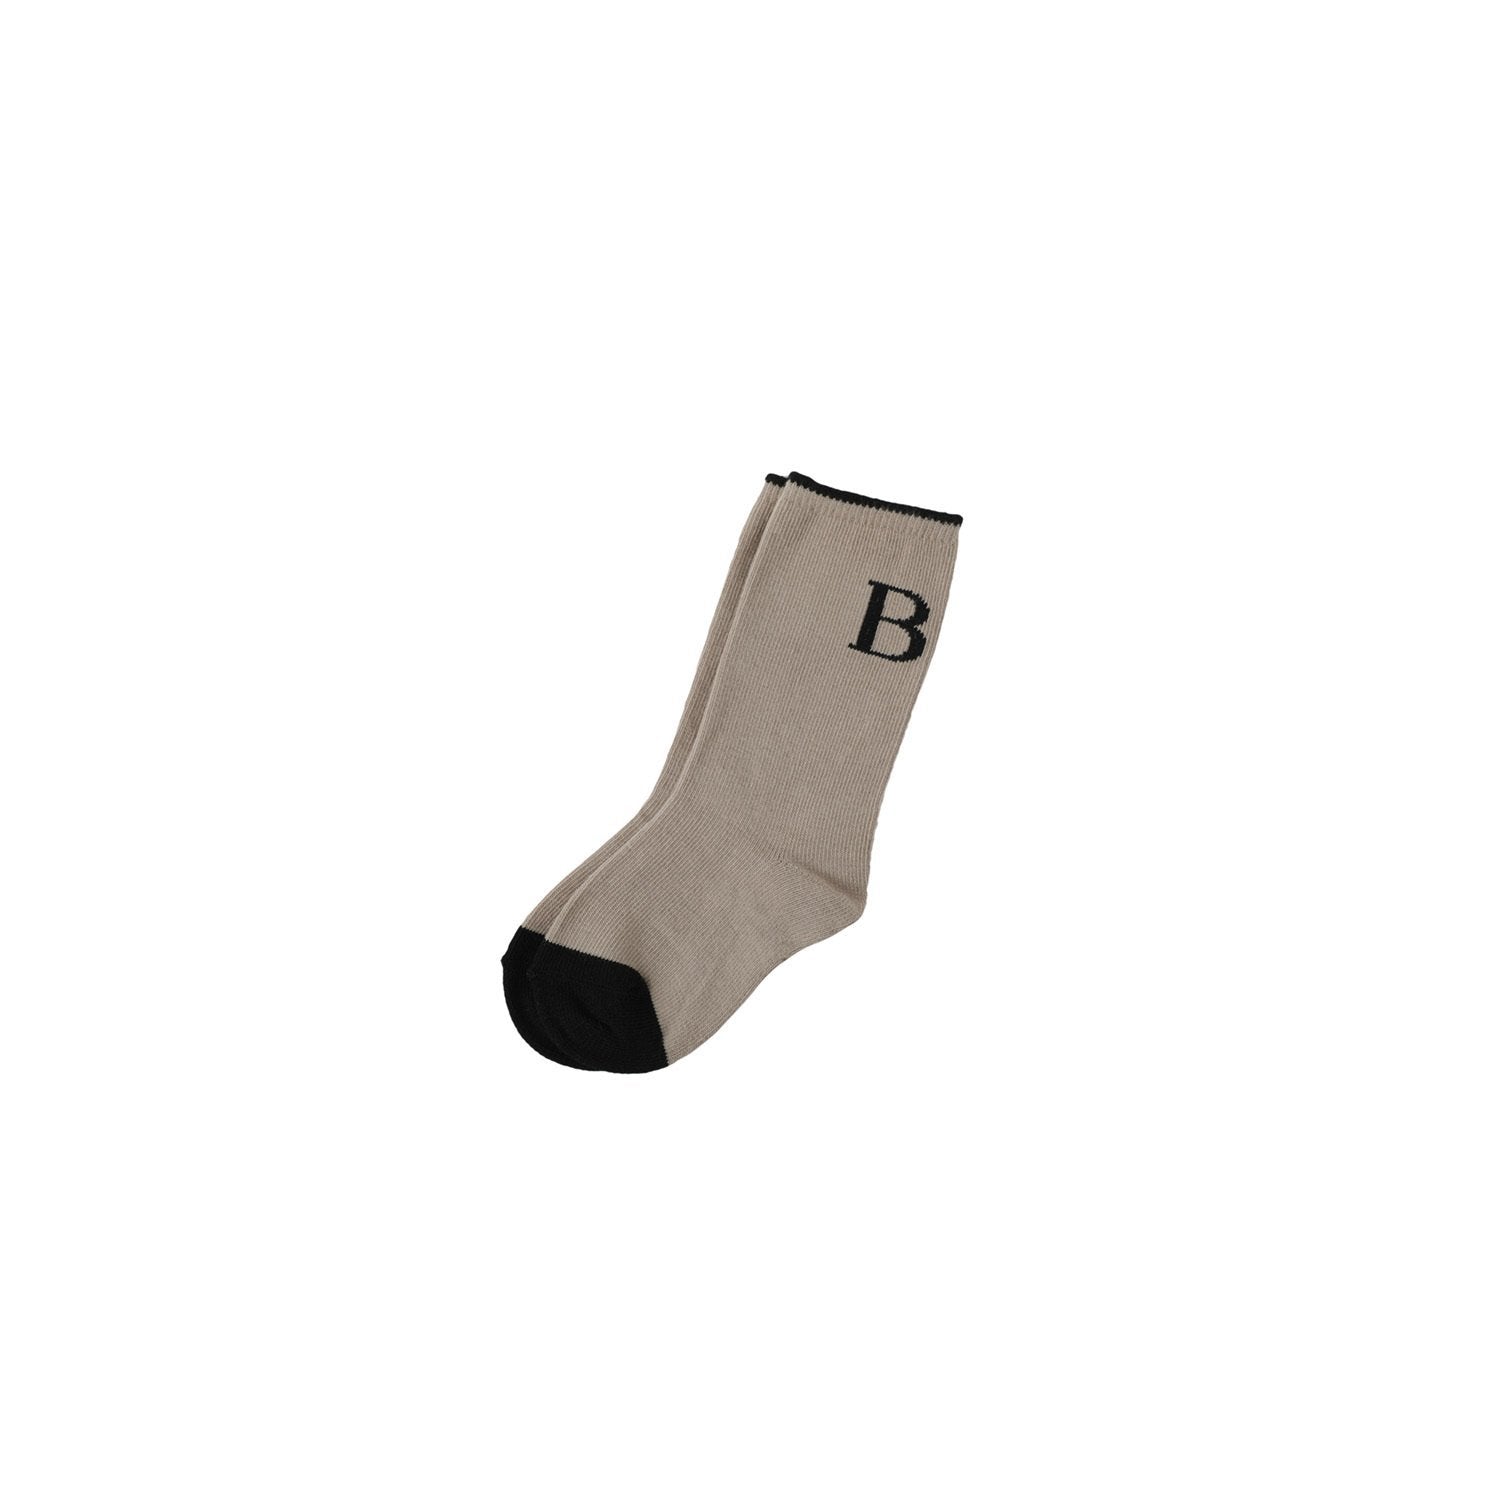 Two Tone Socken find Stylish Fashion for Little People- at Little Foxx Concept Store